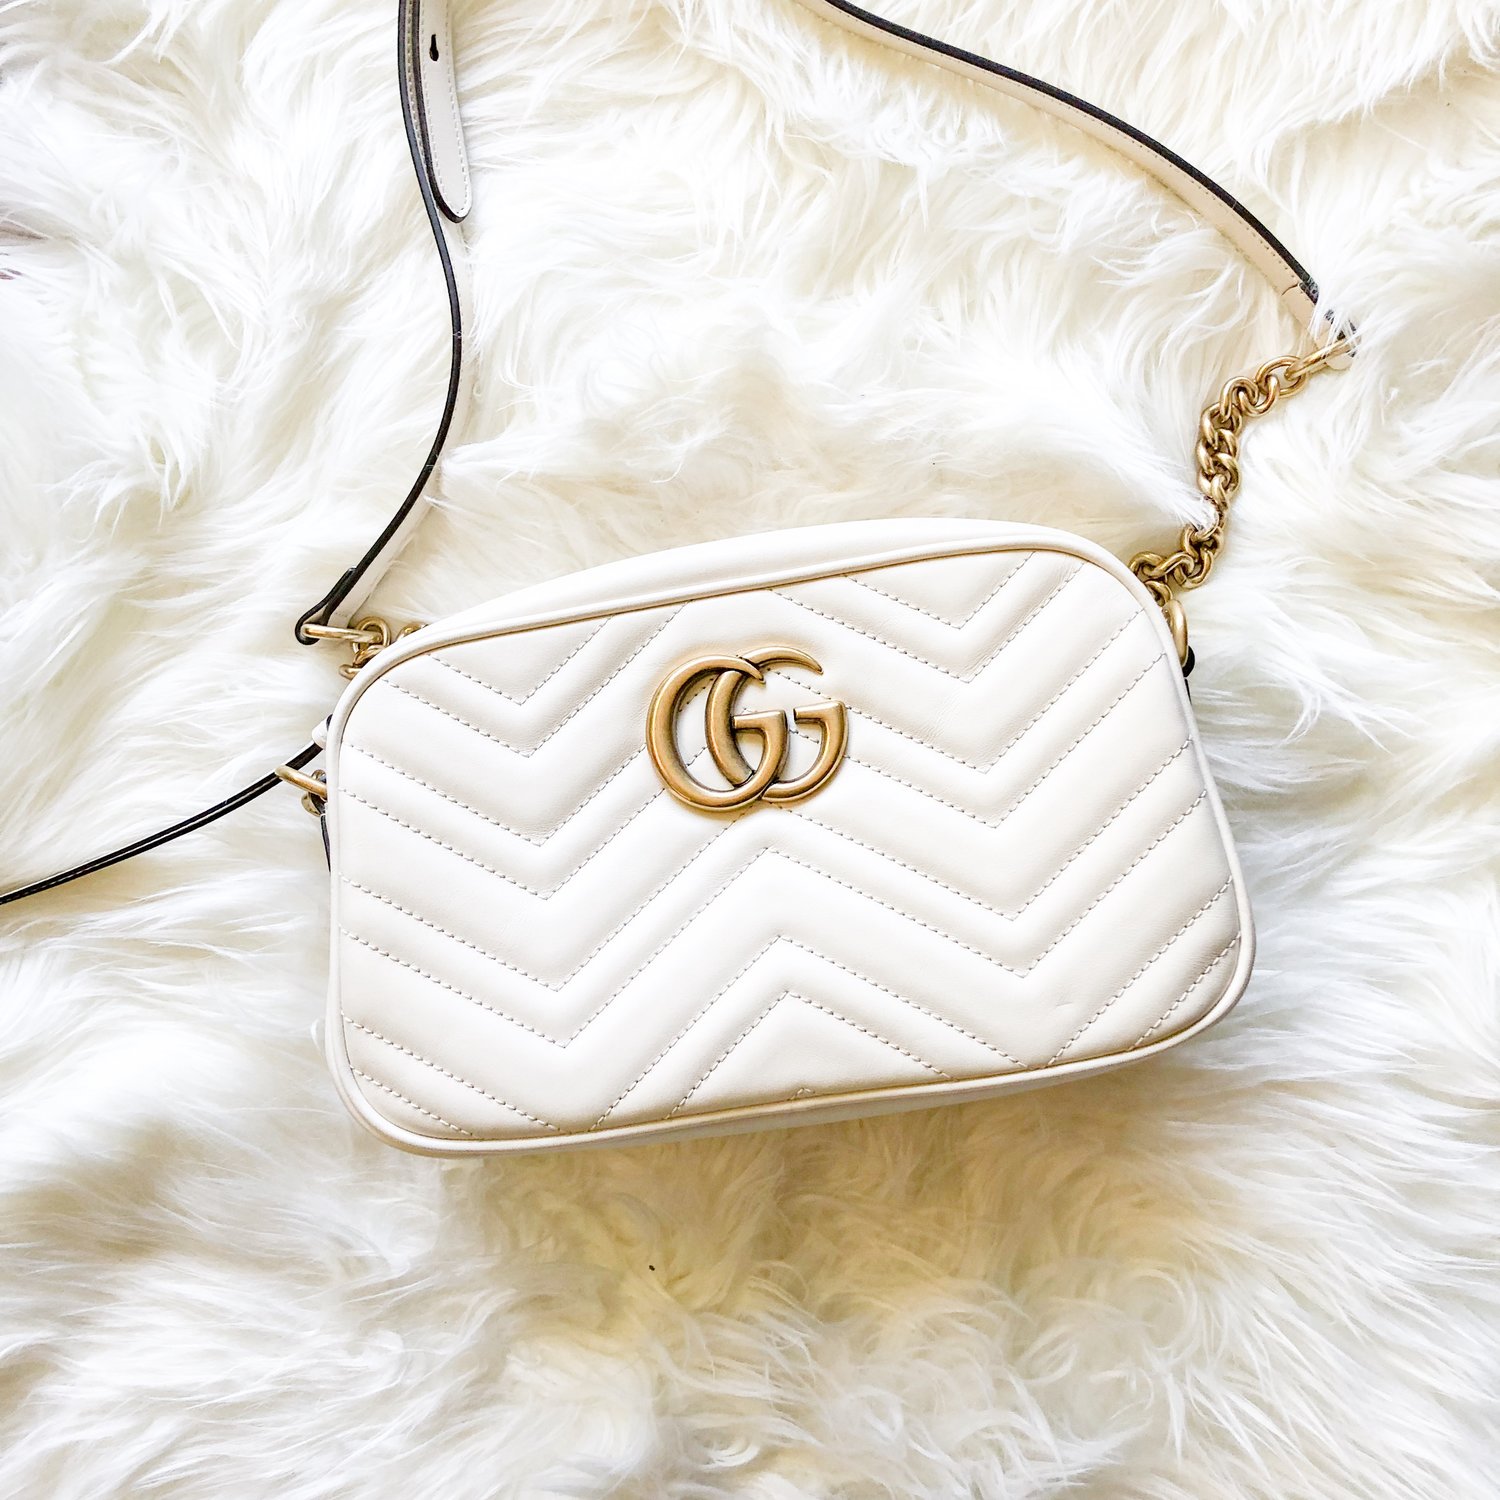 Gucci GG Marmont Small Shoulder Bag Review  Gucci small bag, Gg marmont  small shoulder bag, Gucci handbags crossbody